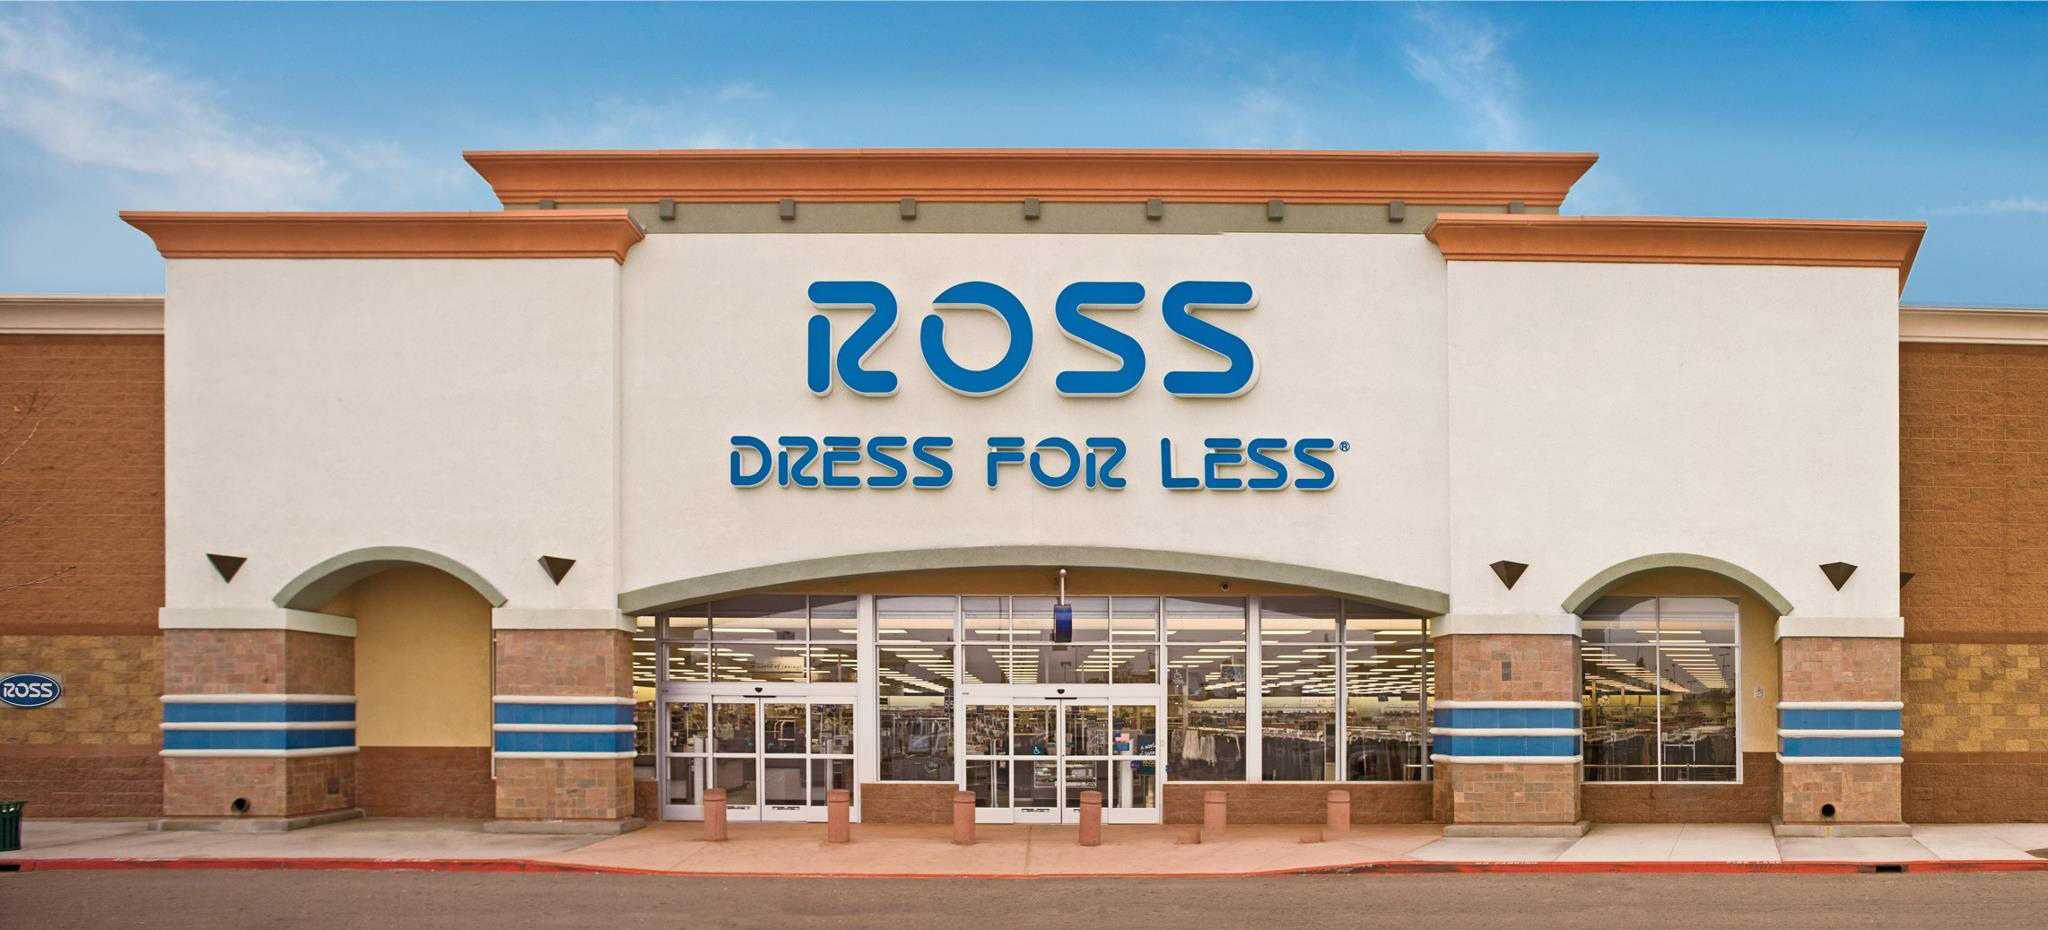 Ross Store Near Me | United States Maps